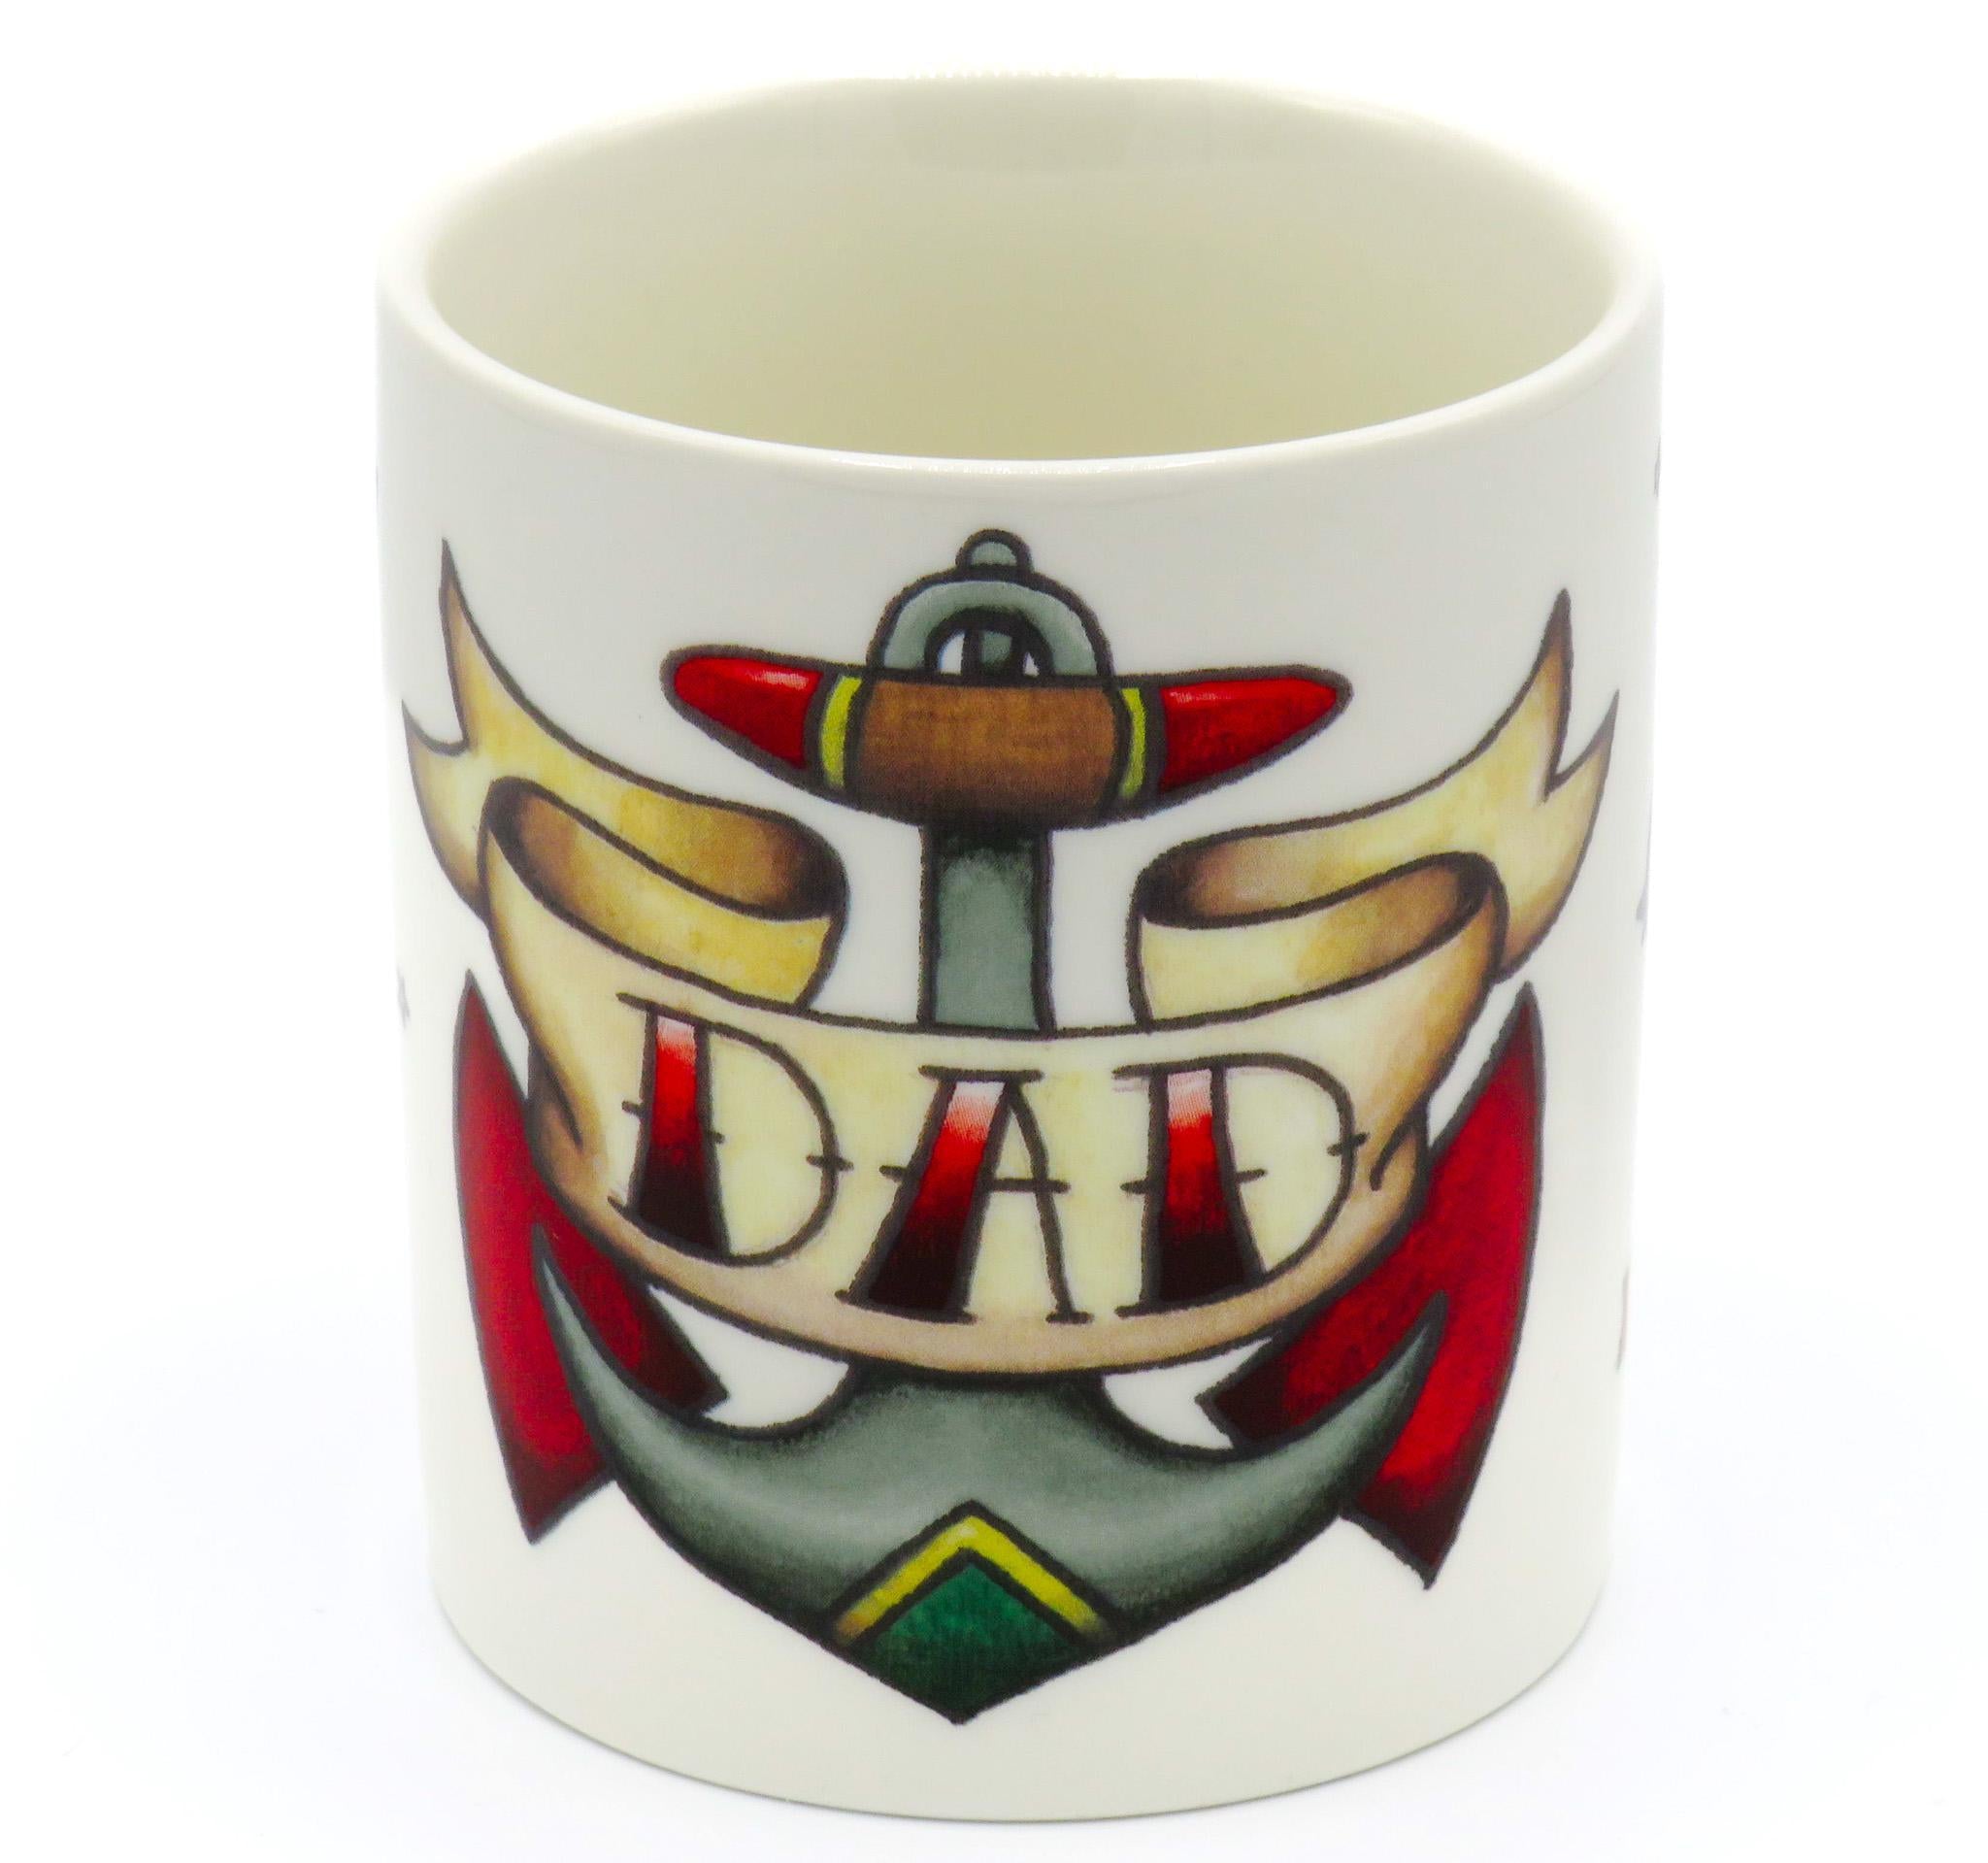  tattoo-style design with the word "Dad" on an anchor,  ivory-colored ceramic mug